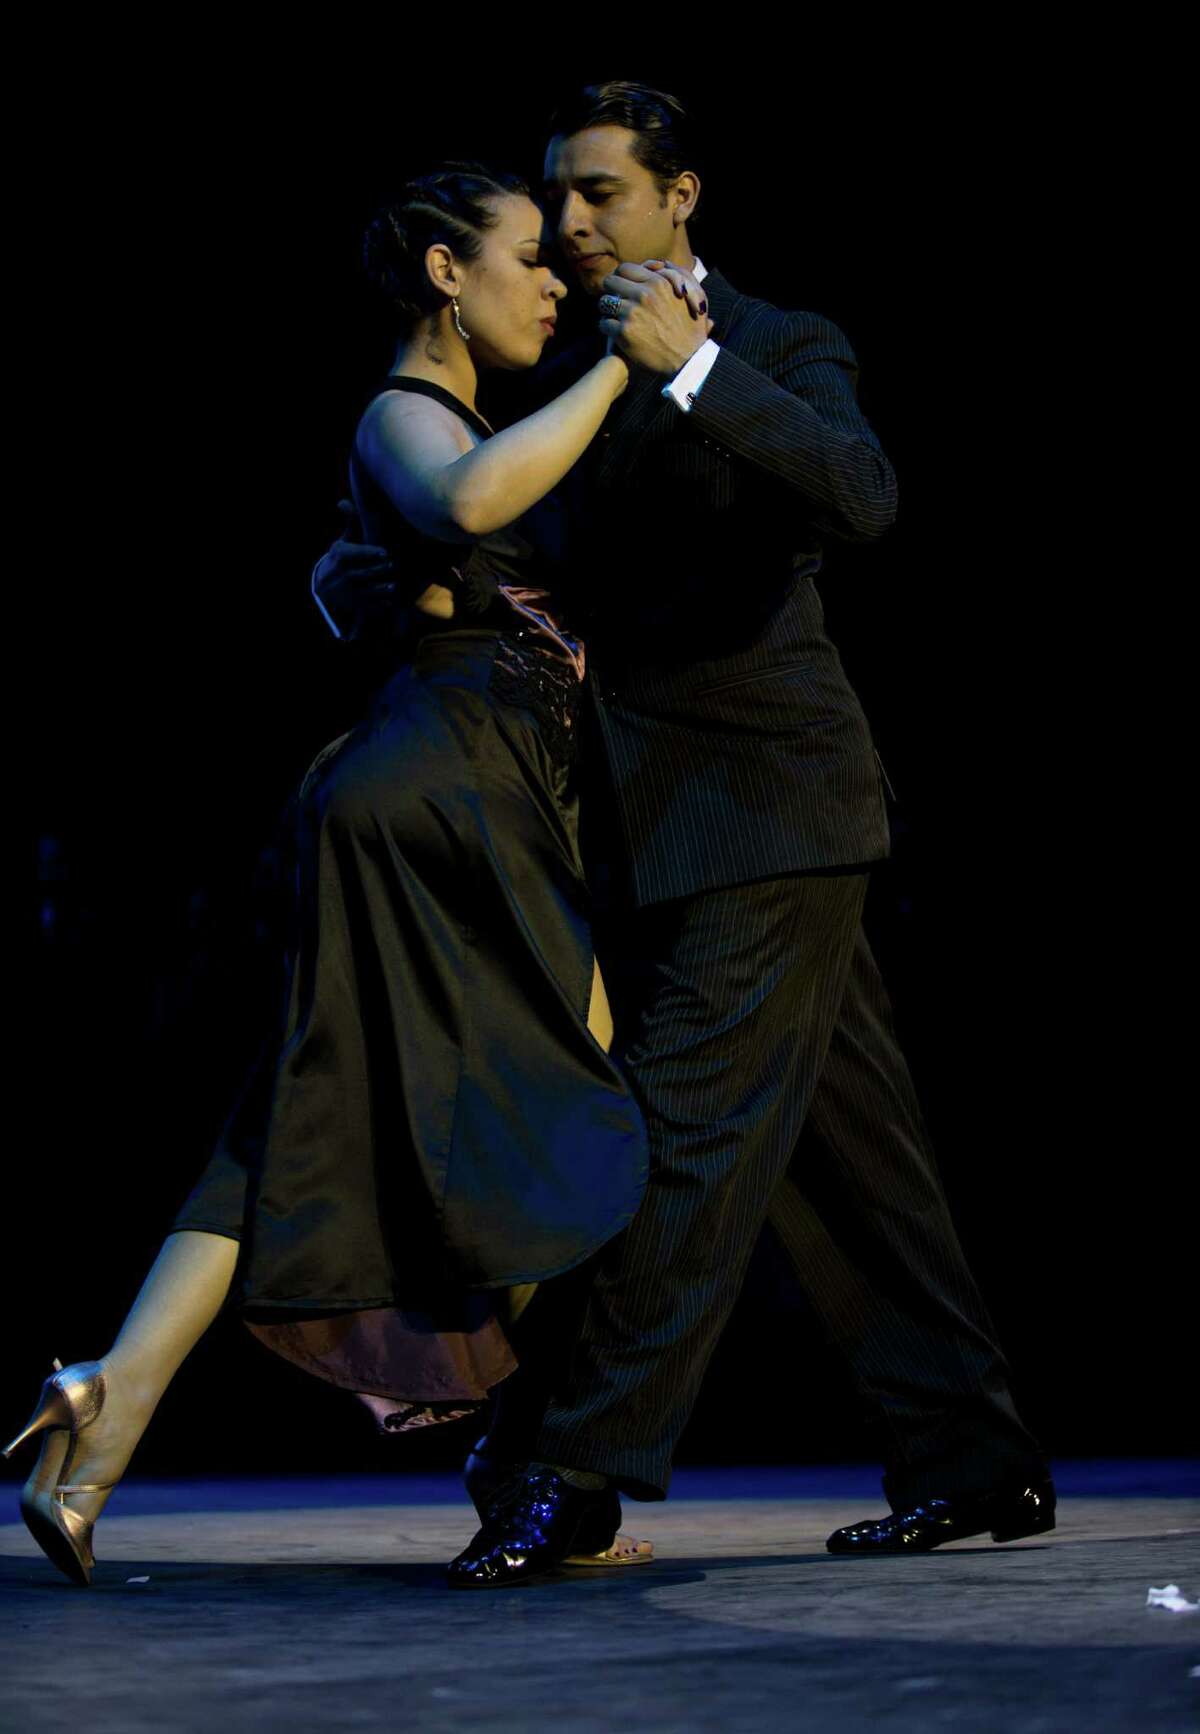 Argentina's couple Facundo de la Cruz Gomez Palavecino, right, and Paola Sanz dance after winning the 2012 Tango Dance World Cup salon finals in Buenos Aires, Argentina, Monday, Aug. 27, 2012. Couples from around the world competed in the finals Argentina's annual tango competition, the highlight of a two-week festival which this year honored Astor Piazzolla, the legendary composer and bandoneonista who revived the genre and infuriated purists by blending tango with rock music in the 1970s.